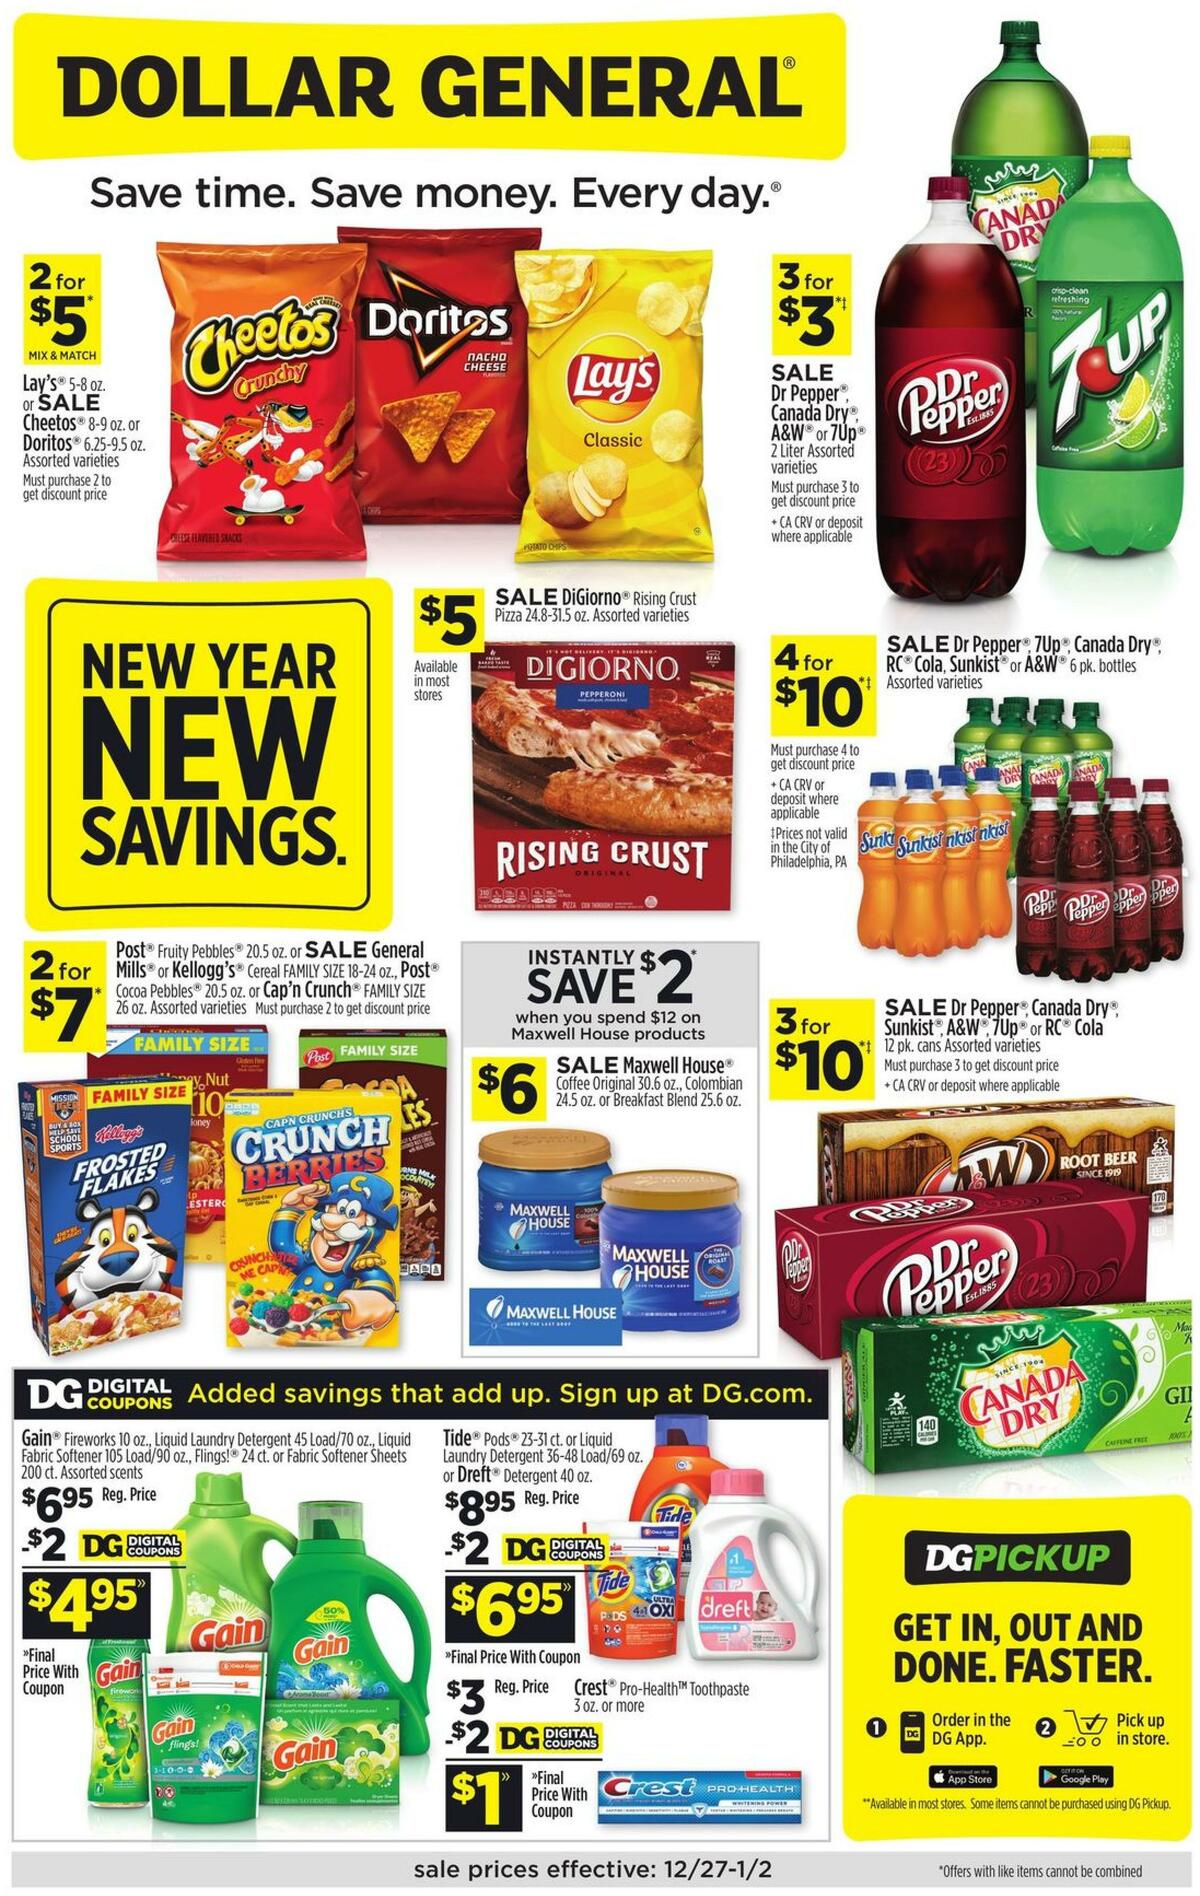 Dollar General Weekly Ads and Circulars from December 27